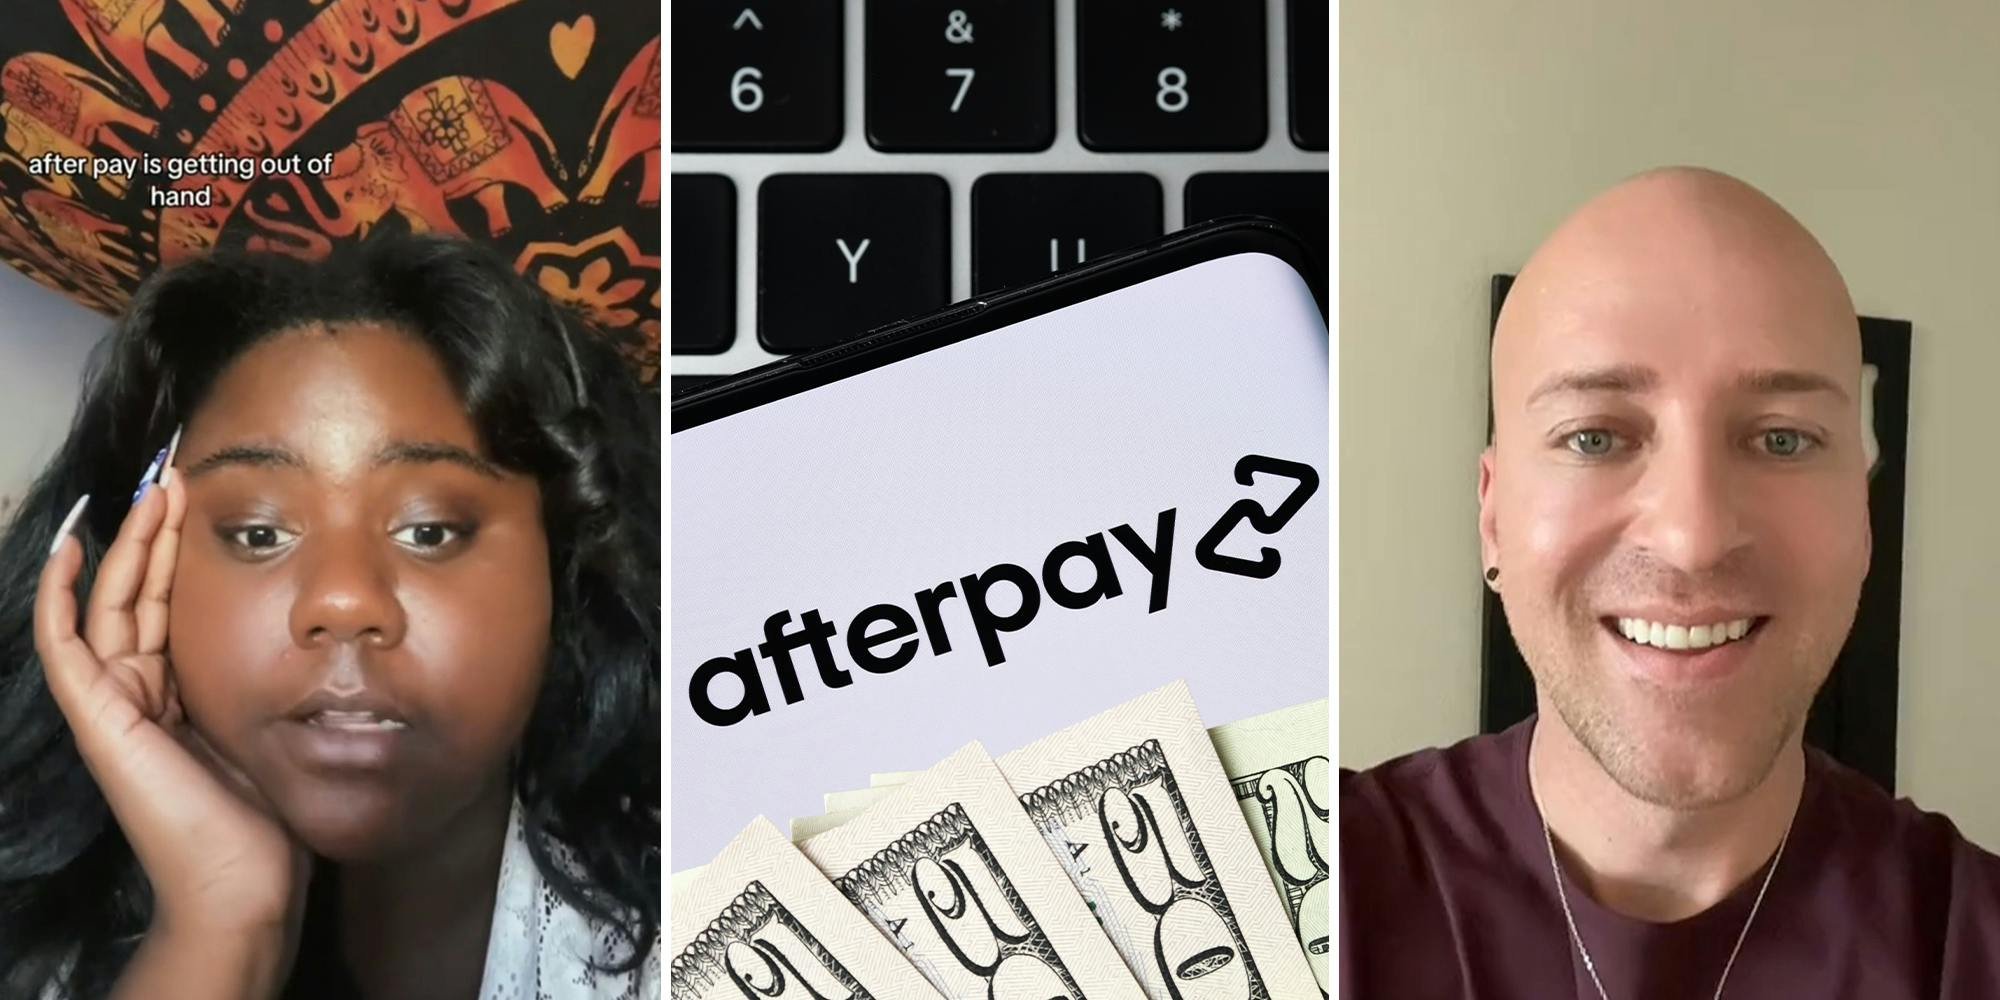 'Afterpay is getting completely out of hand': Credit expert starts debate after issuing PSA about Afterpay